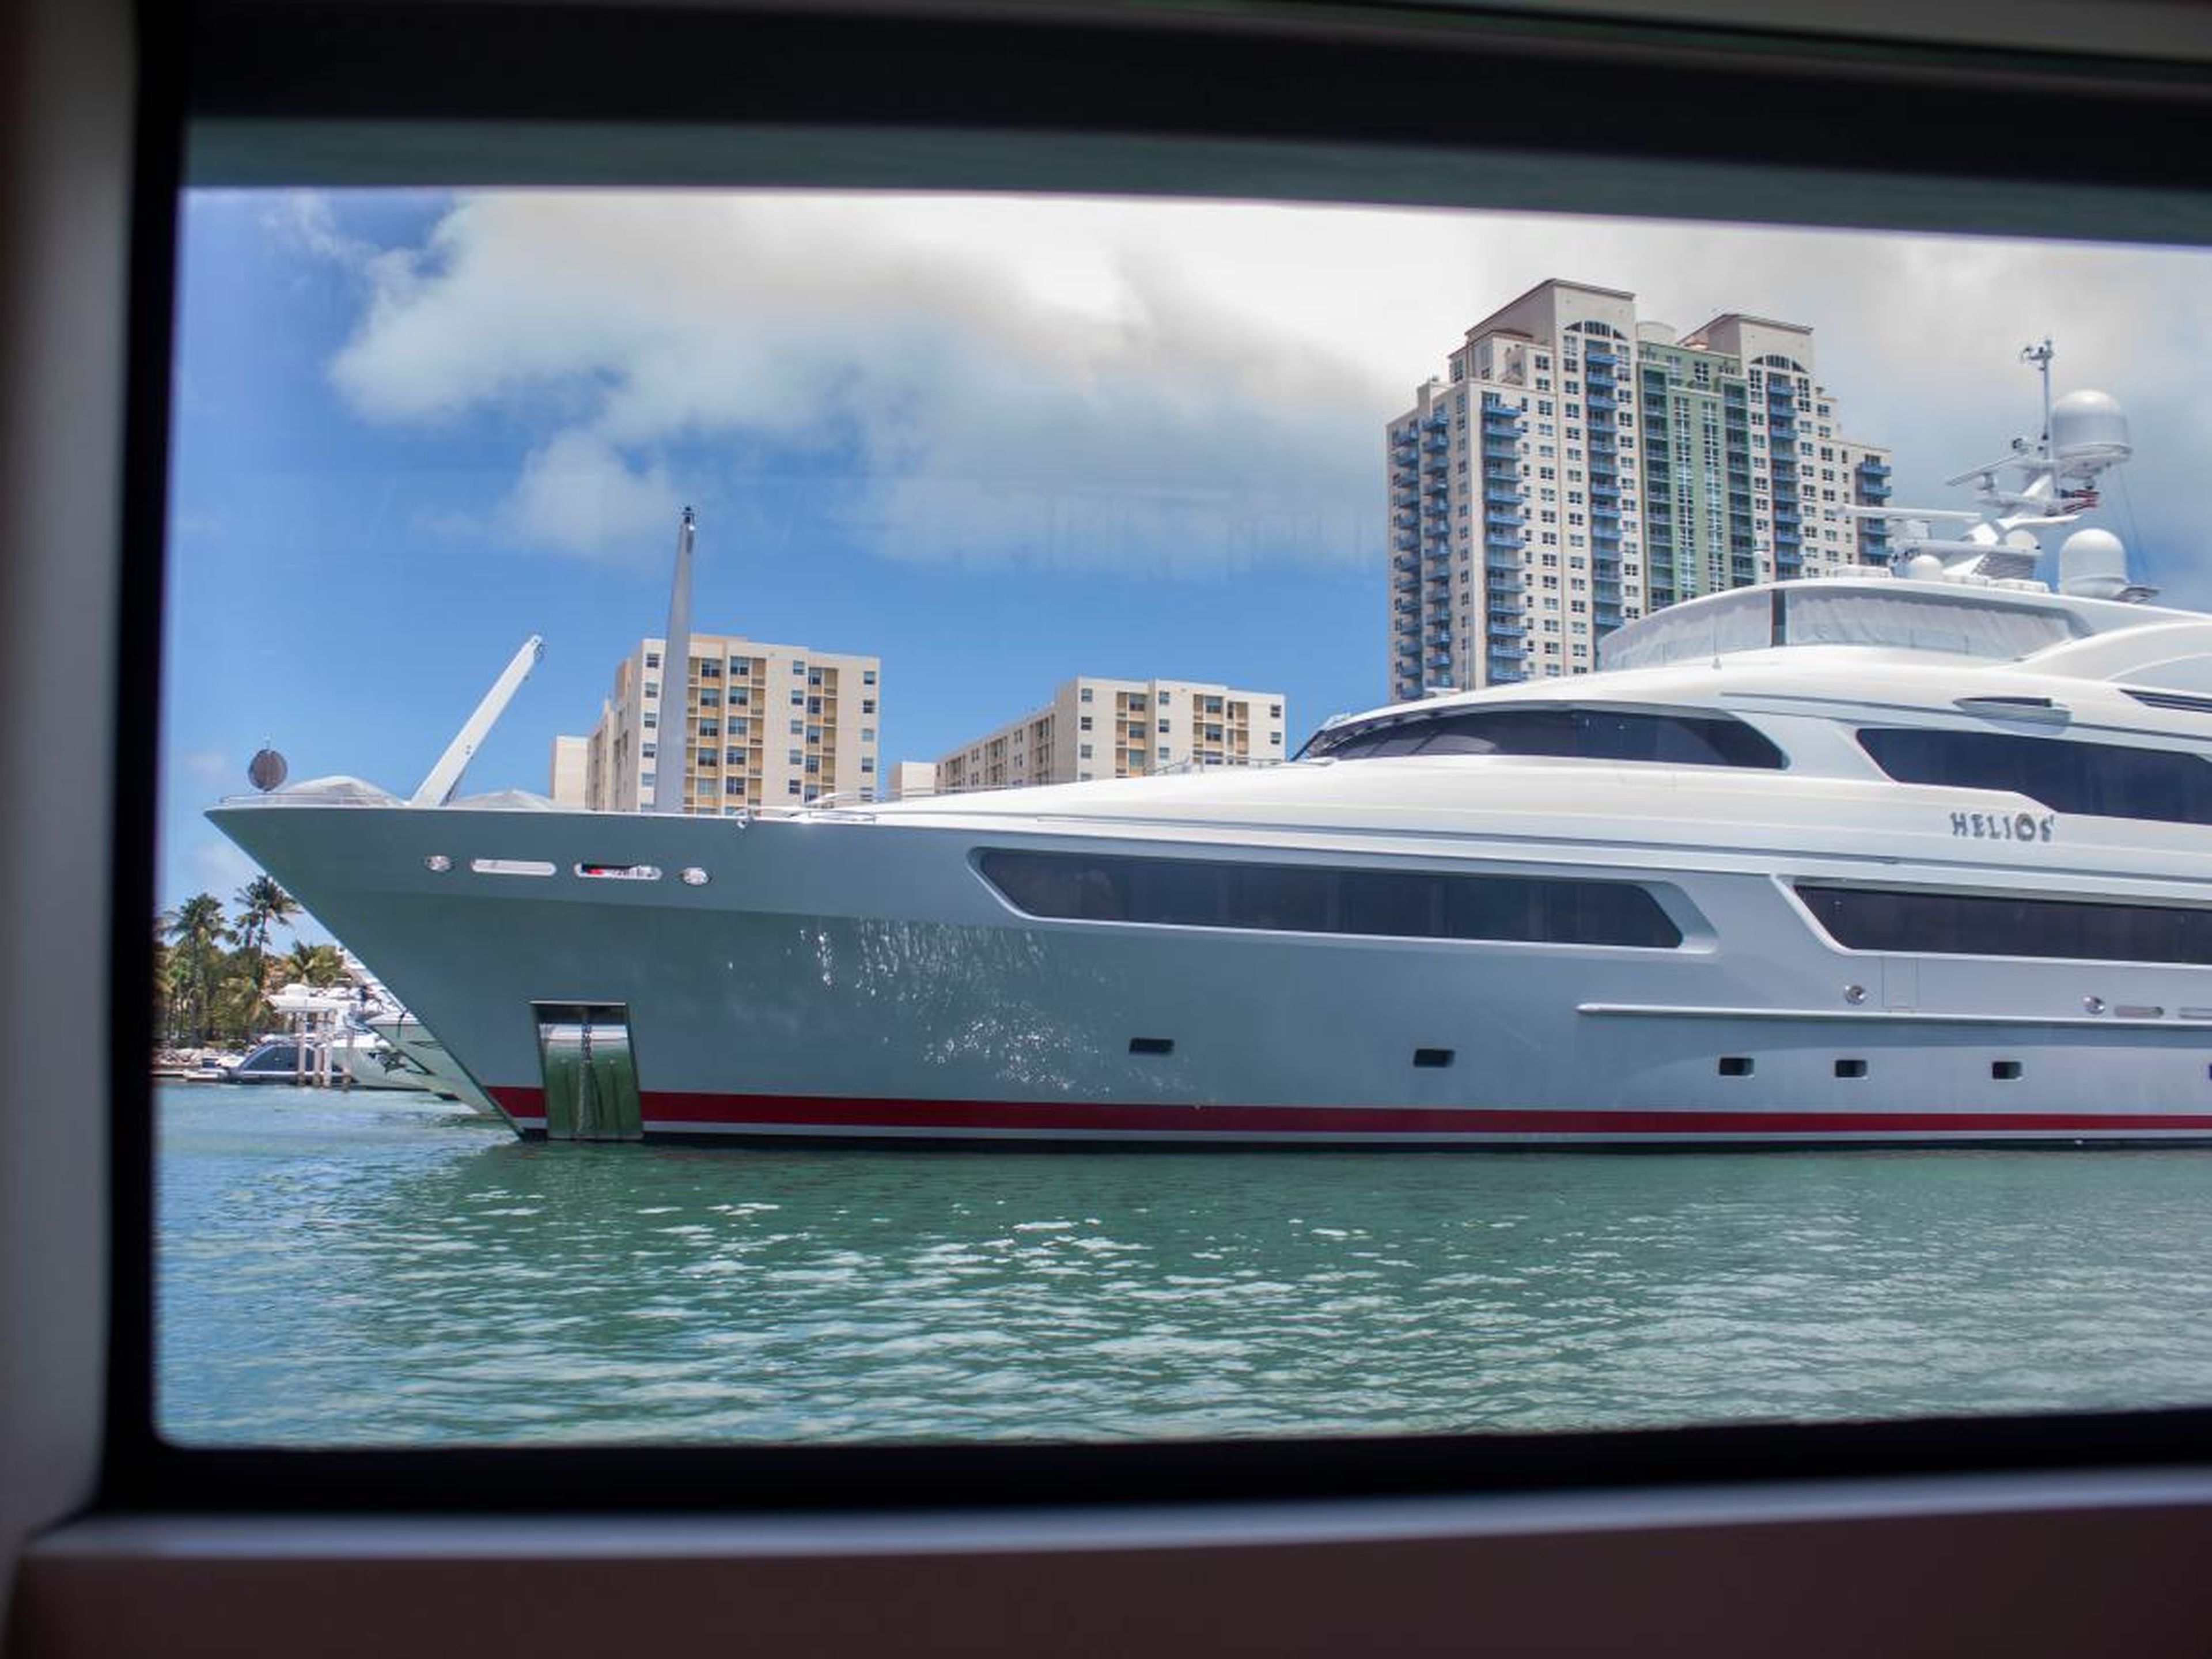 As we sped out of the marina, I got an up-close view of some massive yachts.